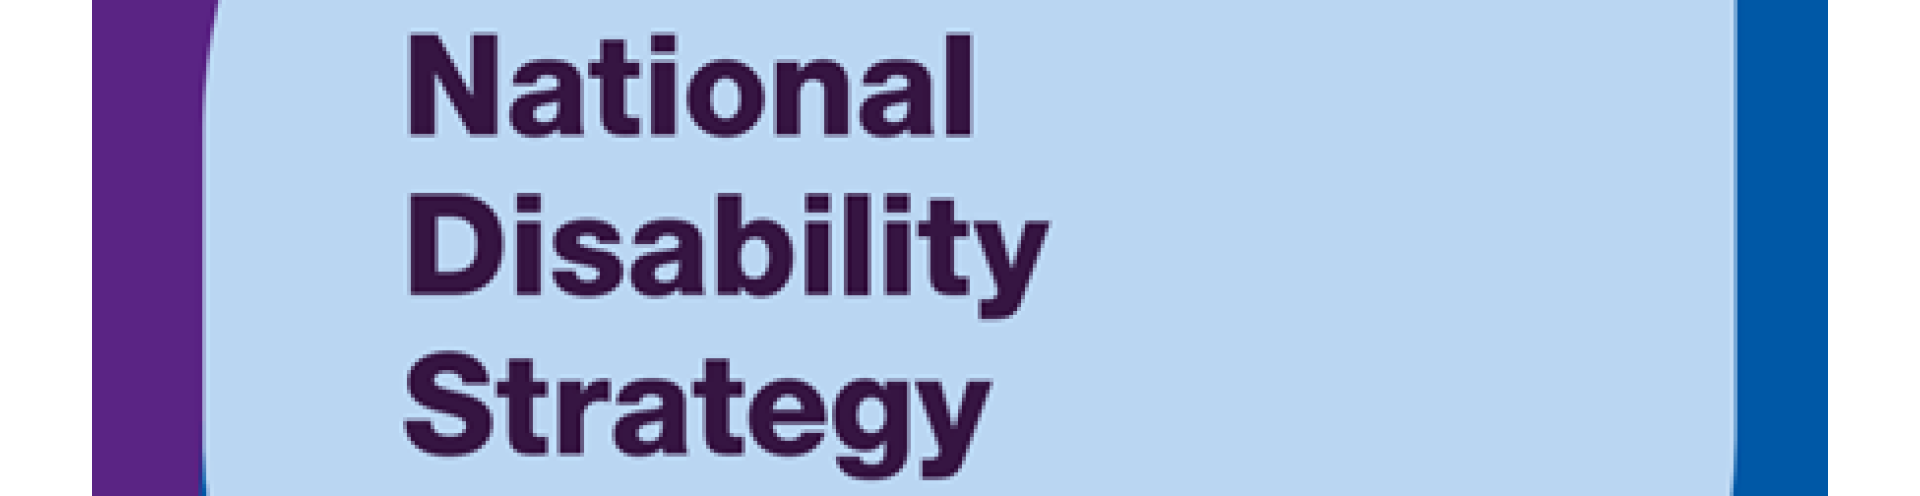 National Disability Strategy cover image